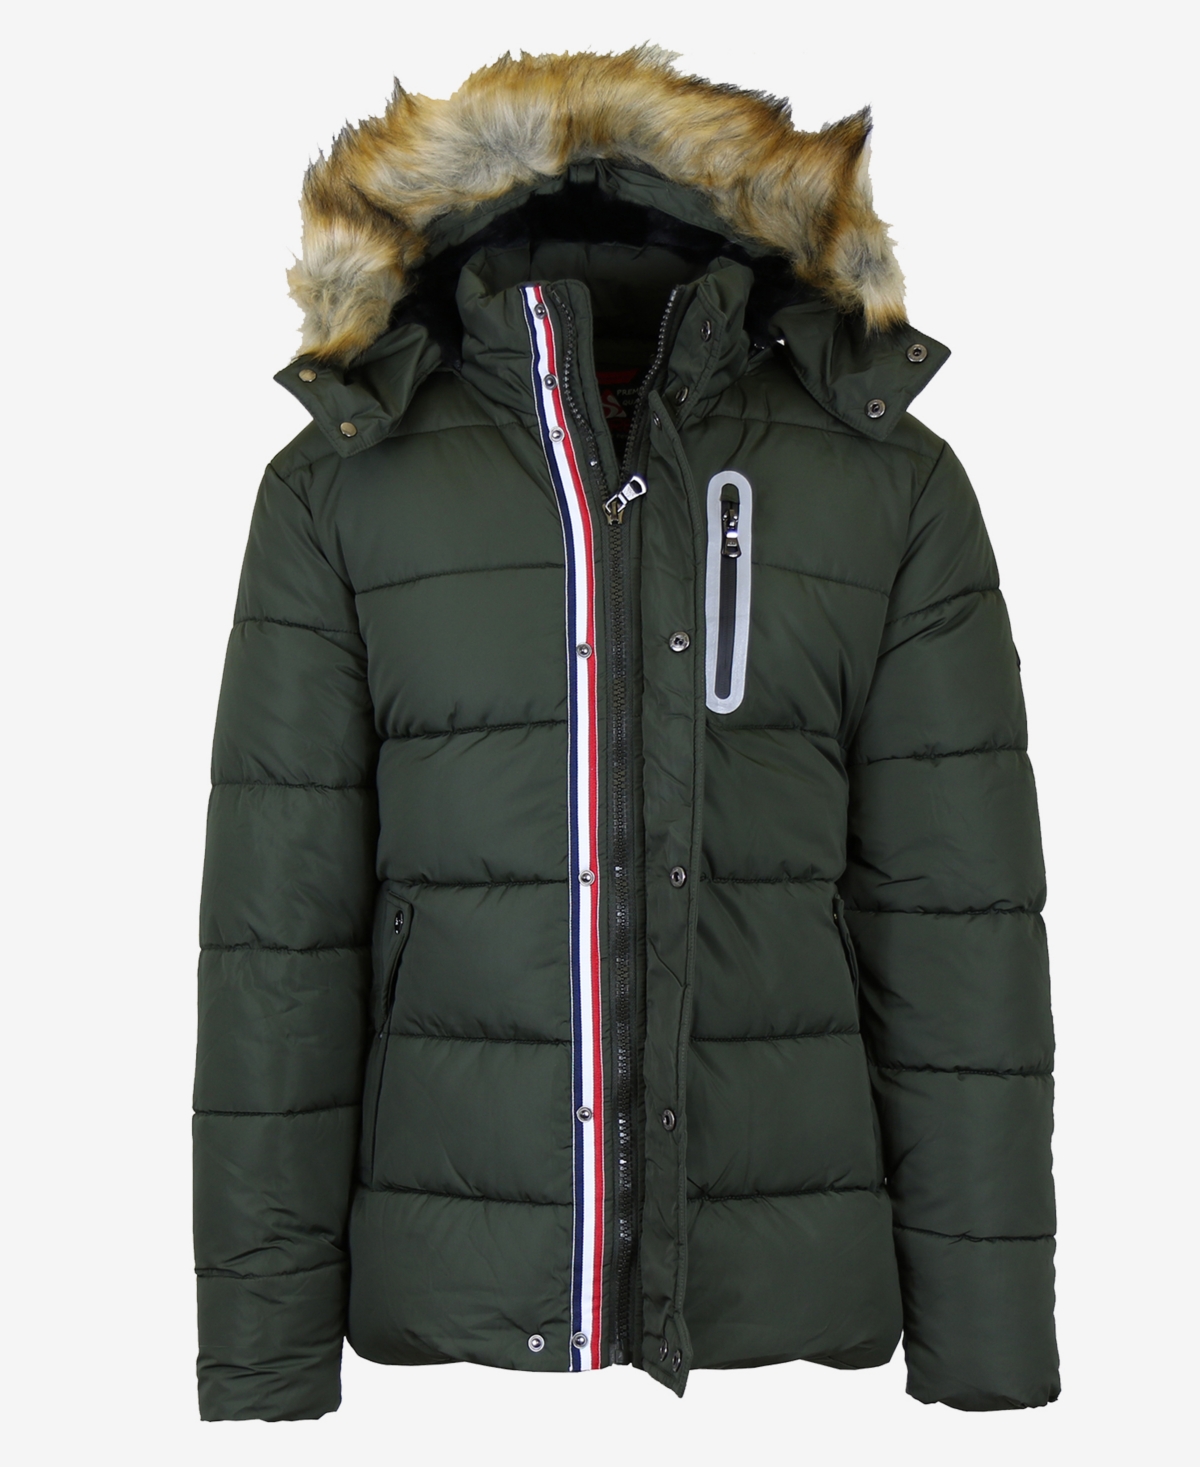 Men's Heavy Tech Puffer Jacket with Hood - Olive